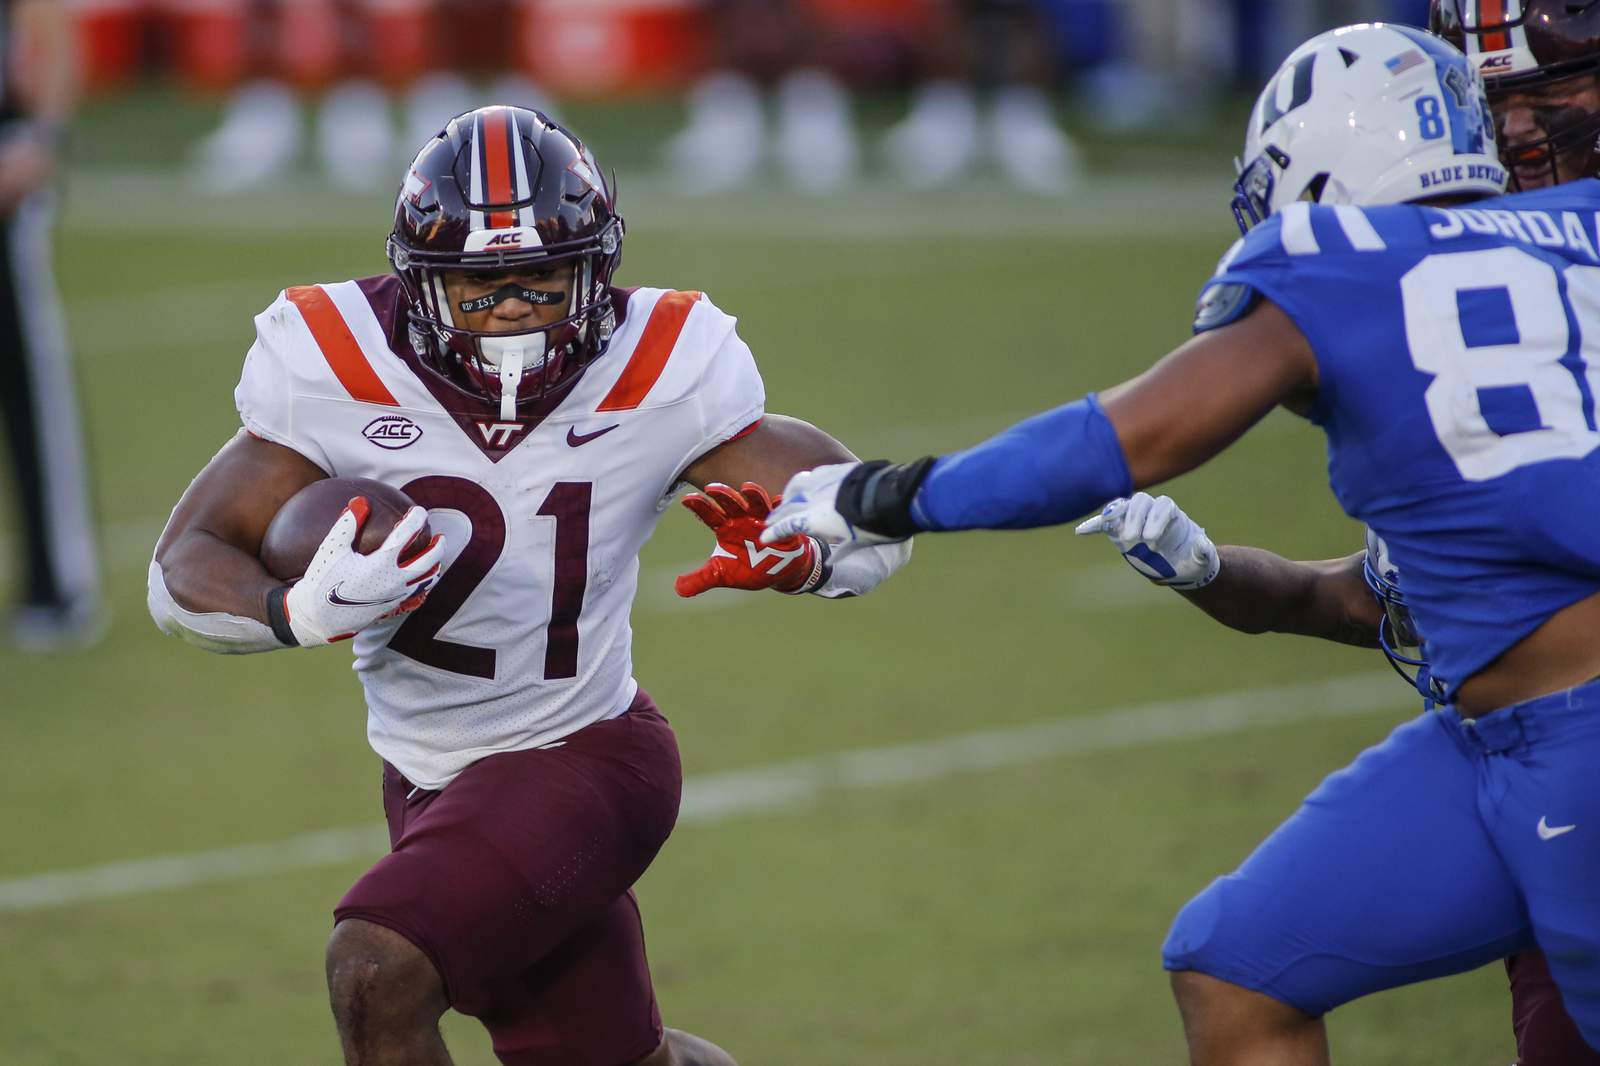 'They certainly are dangerous’: Virginia Tech prepares for UNC after Khalil Herbert’s record Saturday